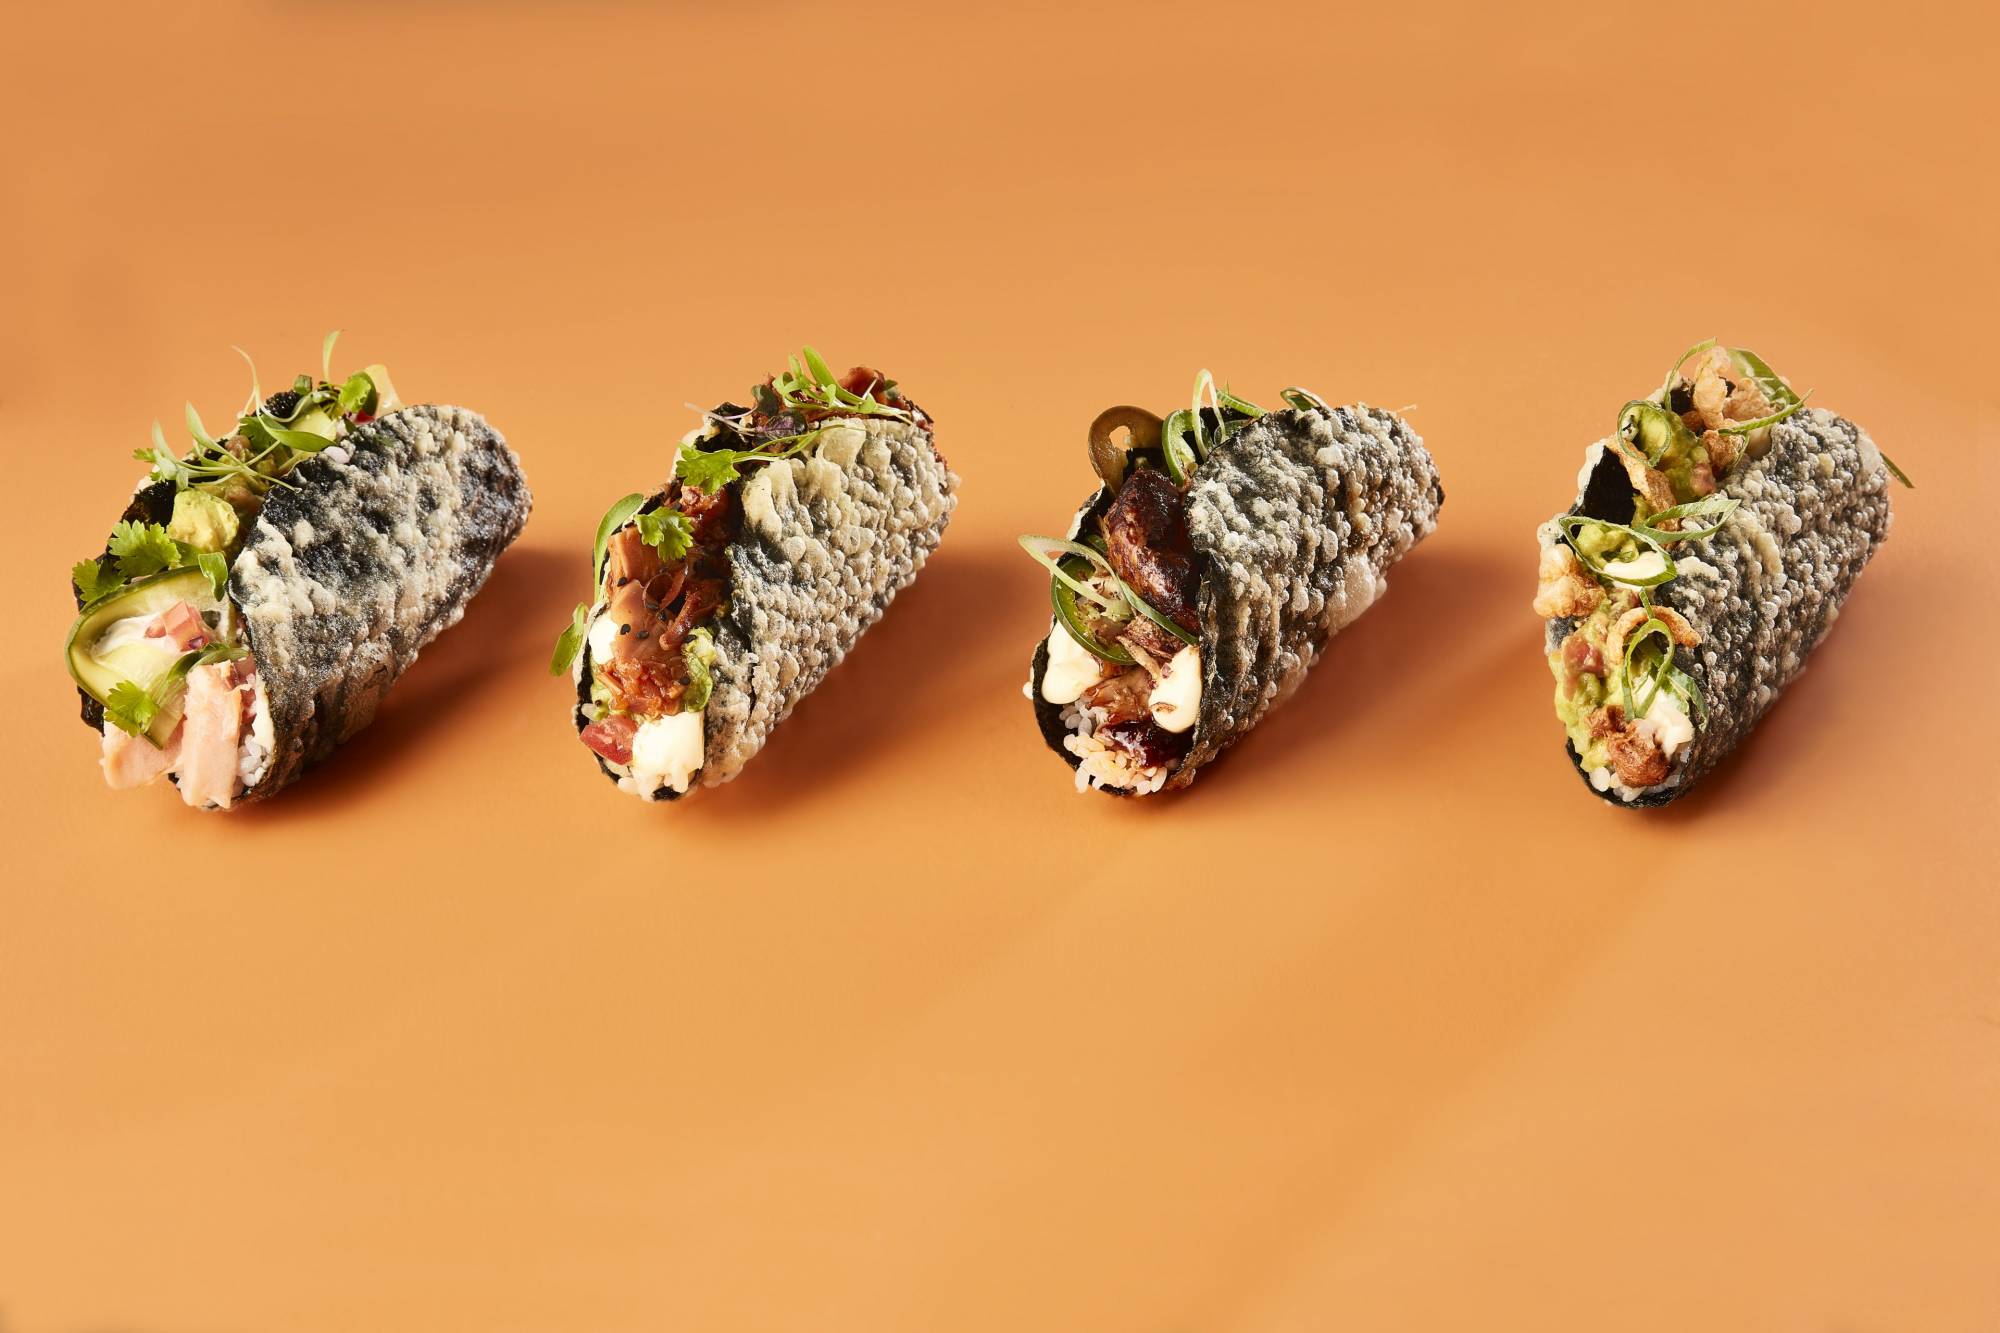 TokyoTaco product imagery